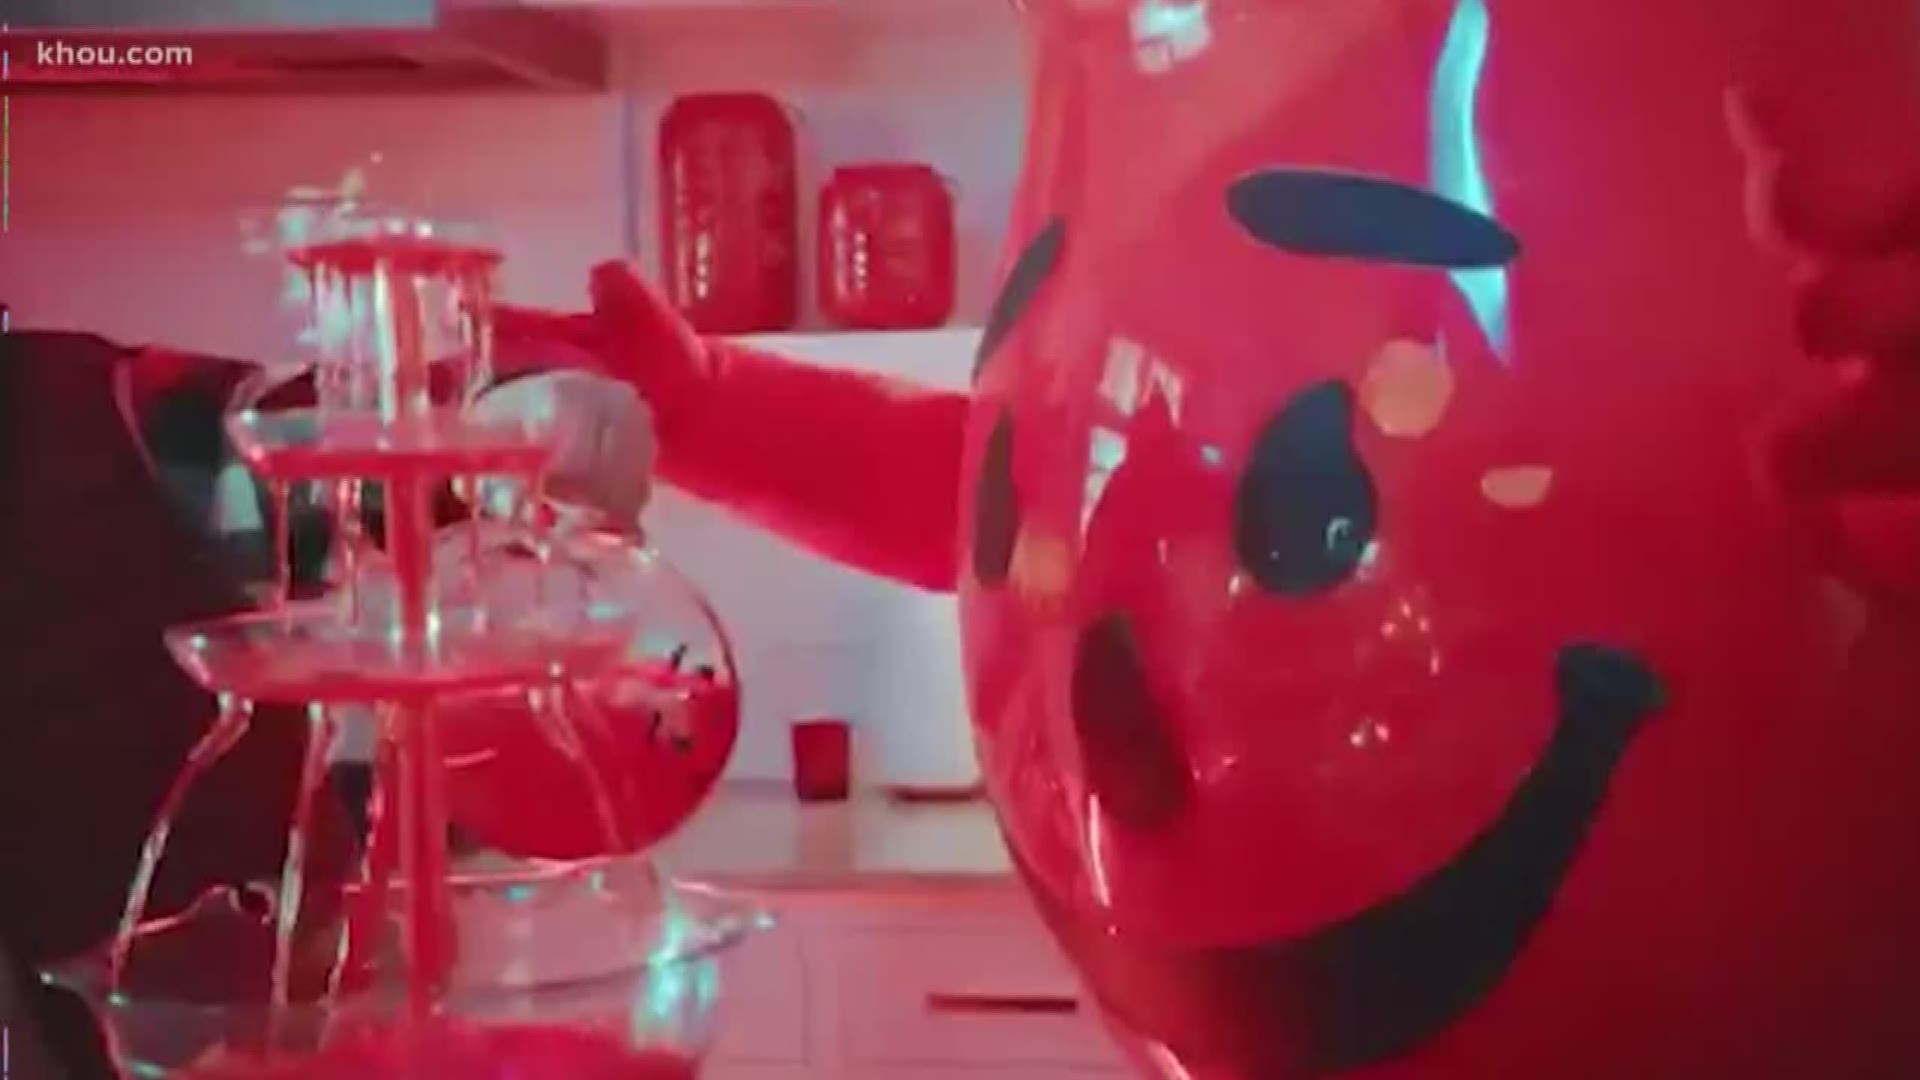 Rapper Lil Jon is getting into the holiday spirit with a festive new single titled "All I Really Want For Christmas"... and it features the Kool-Aid Man.